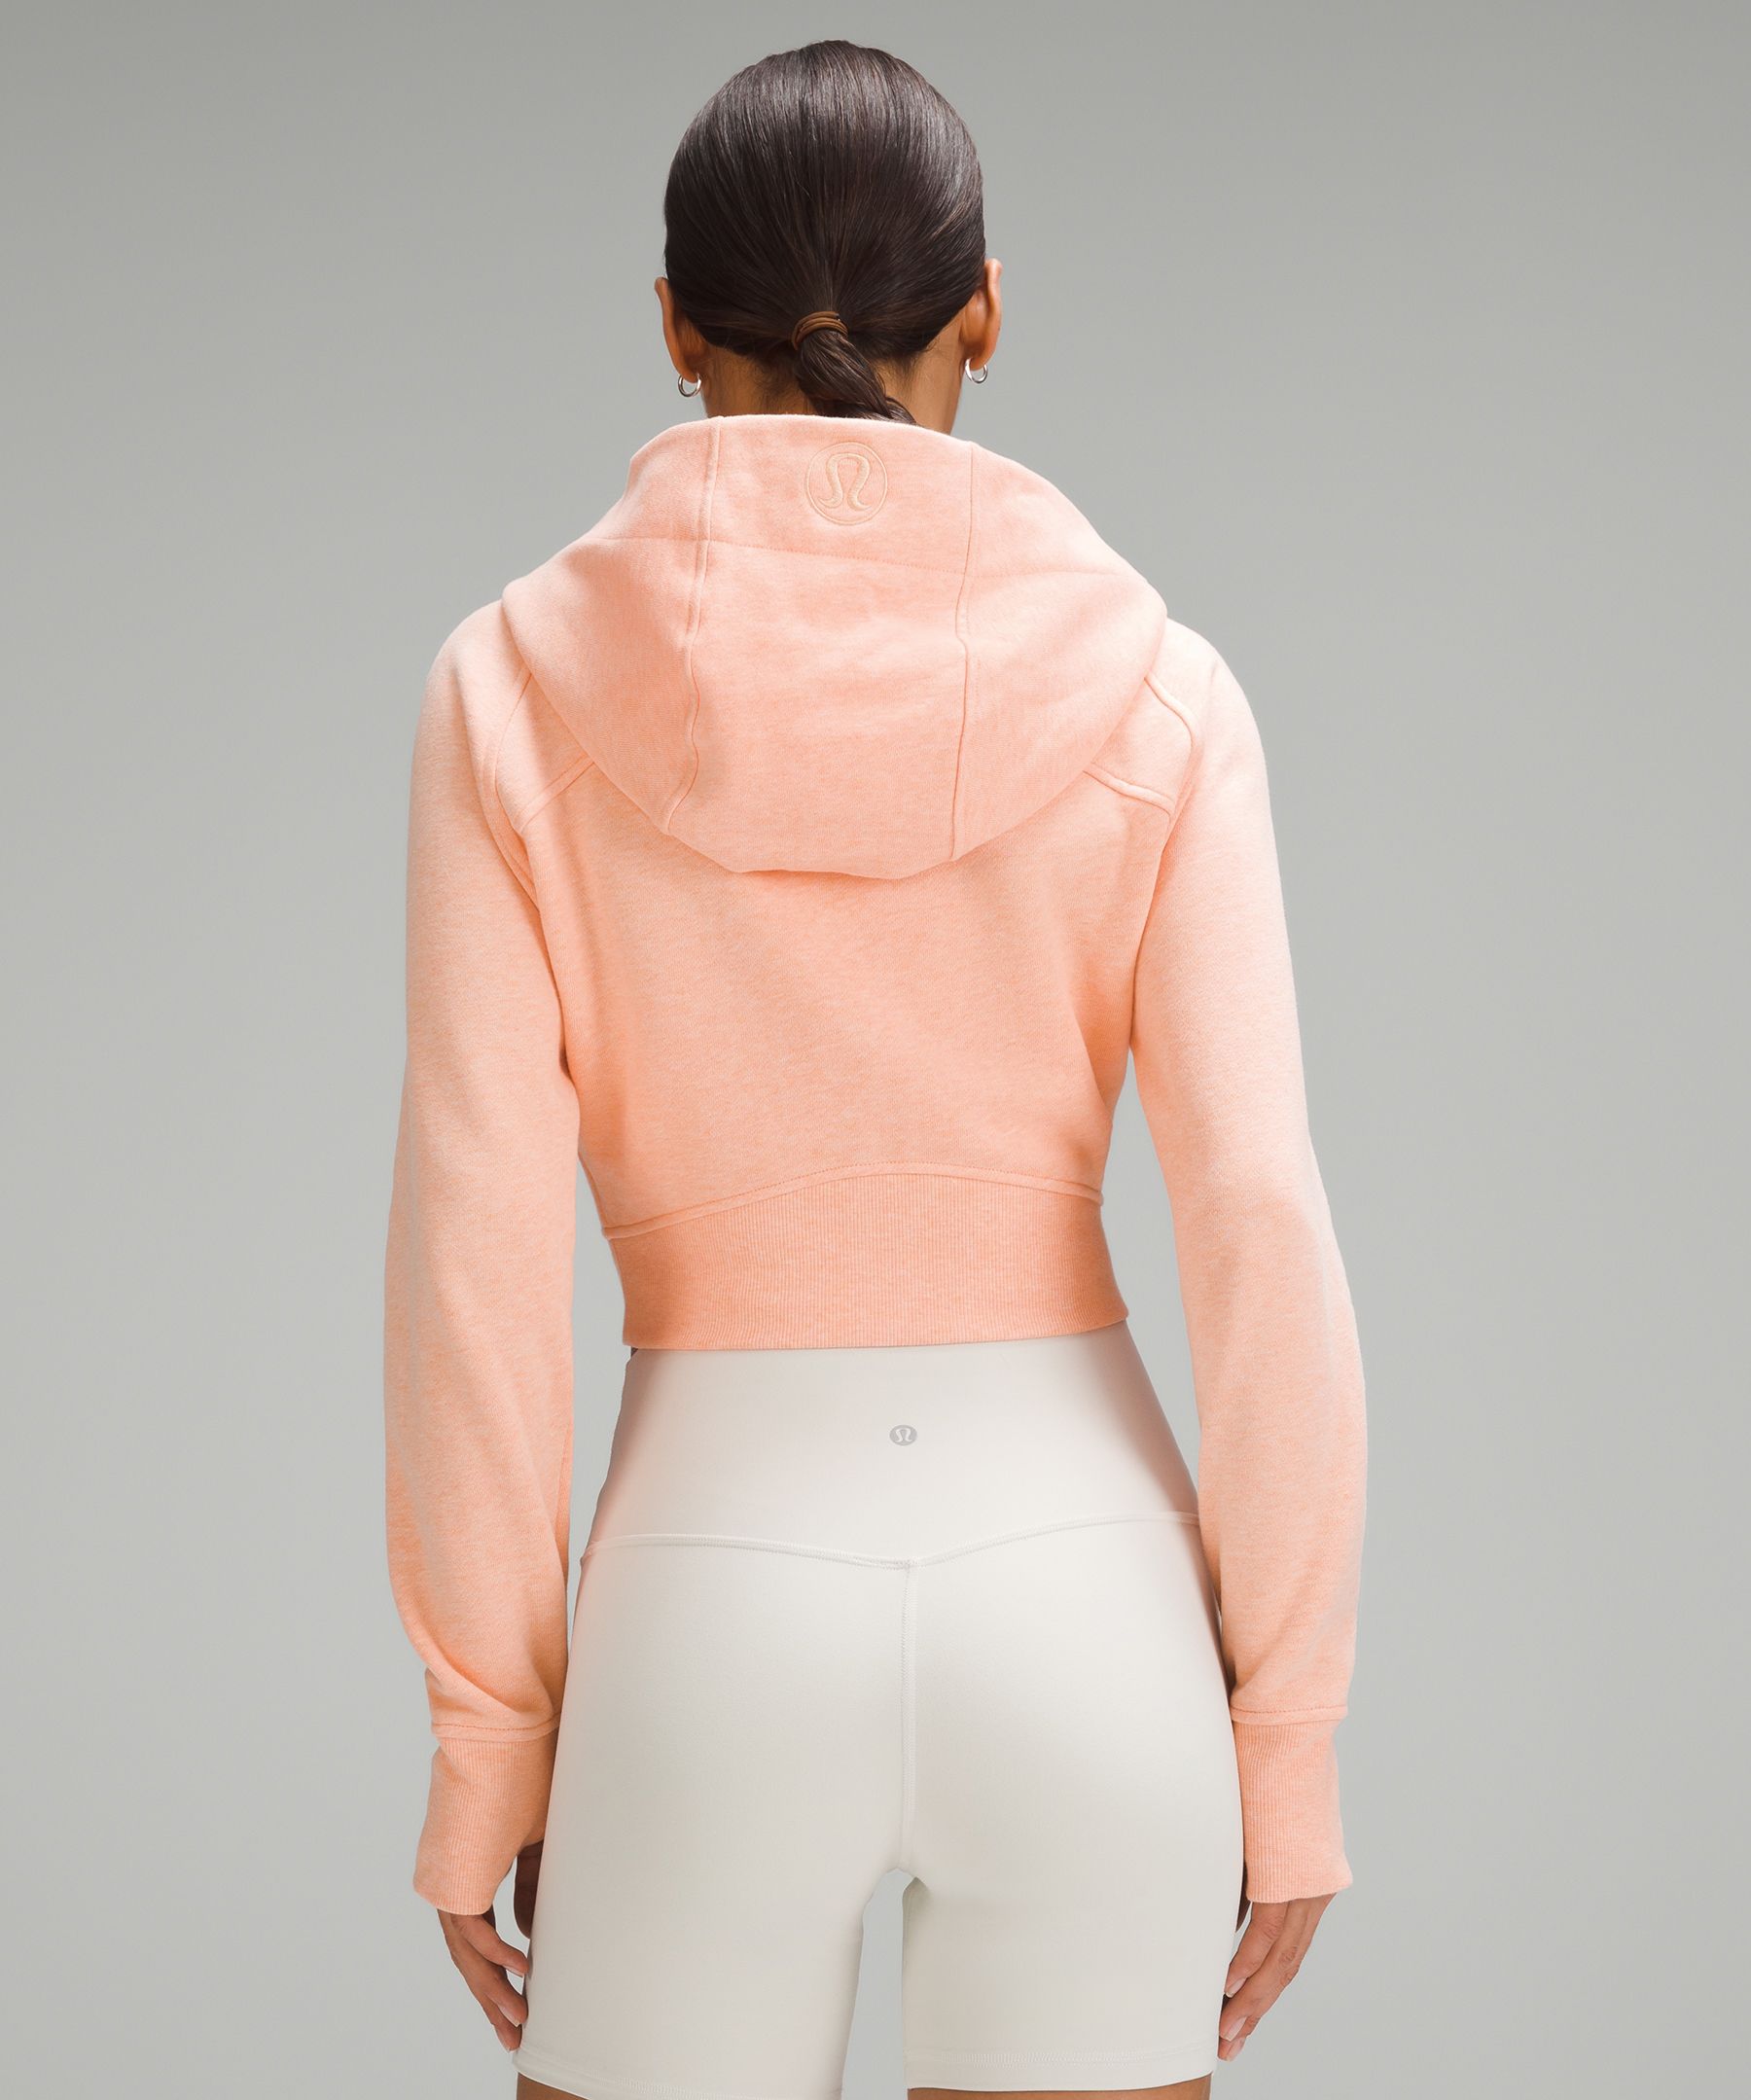 Lululemon Scuba Cropped Full Zip Hoodie Blue Size L - $70 (41% Off Retail)  - From Haley